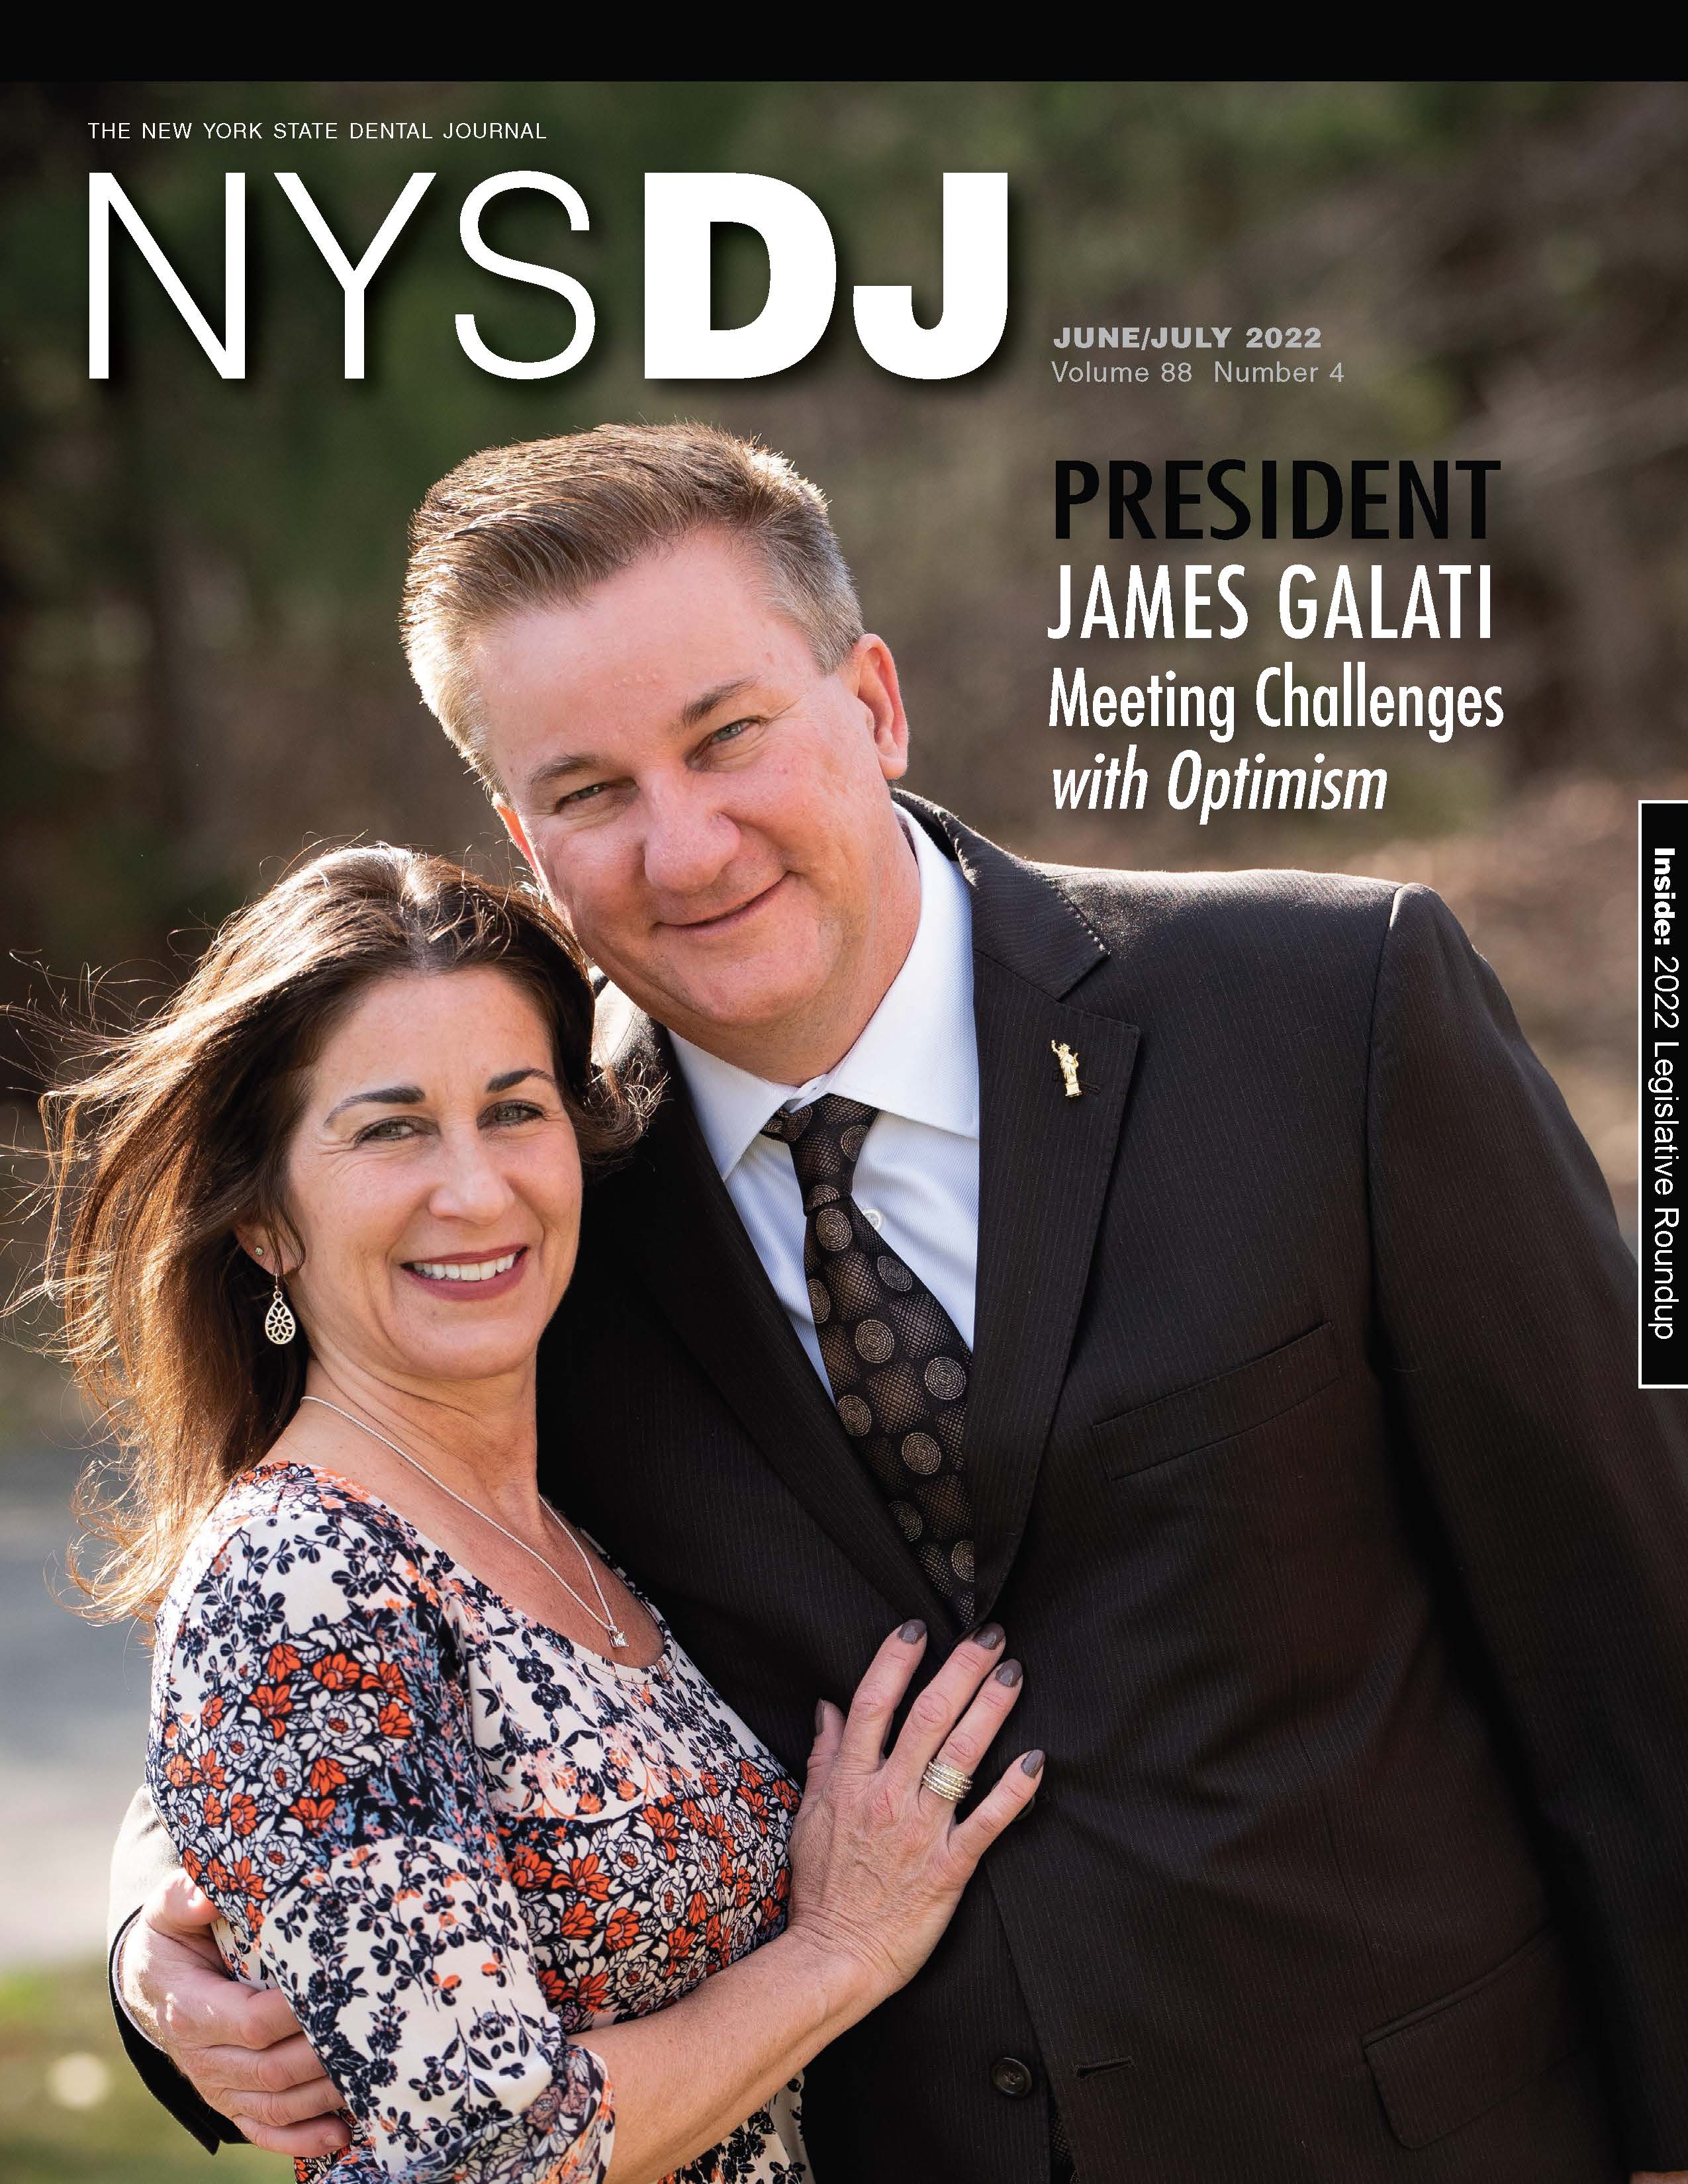 Cover of the NYSDJ with NYSDA President James Galati and wife, Kelli.